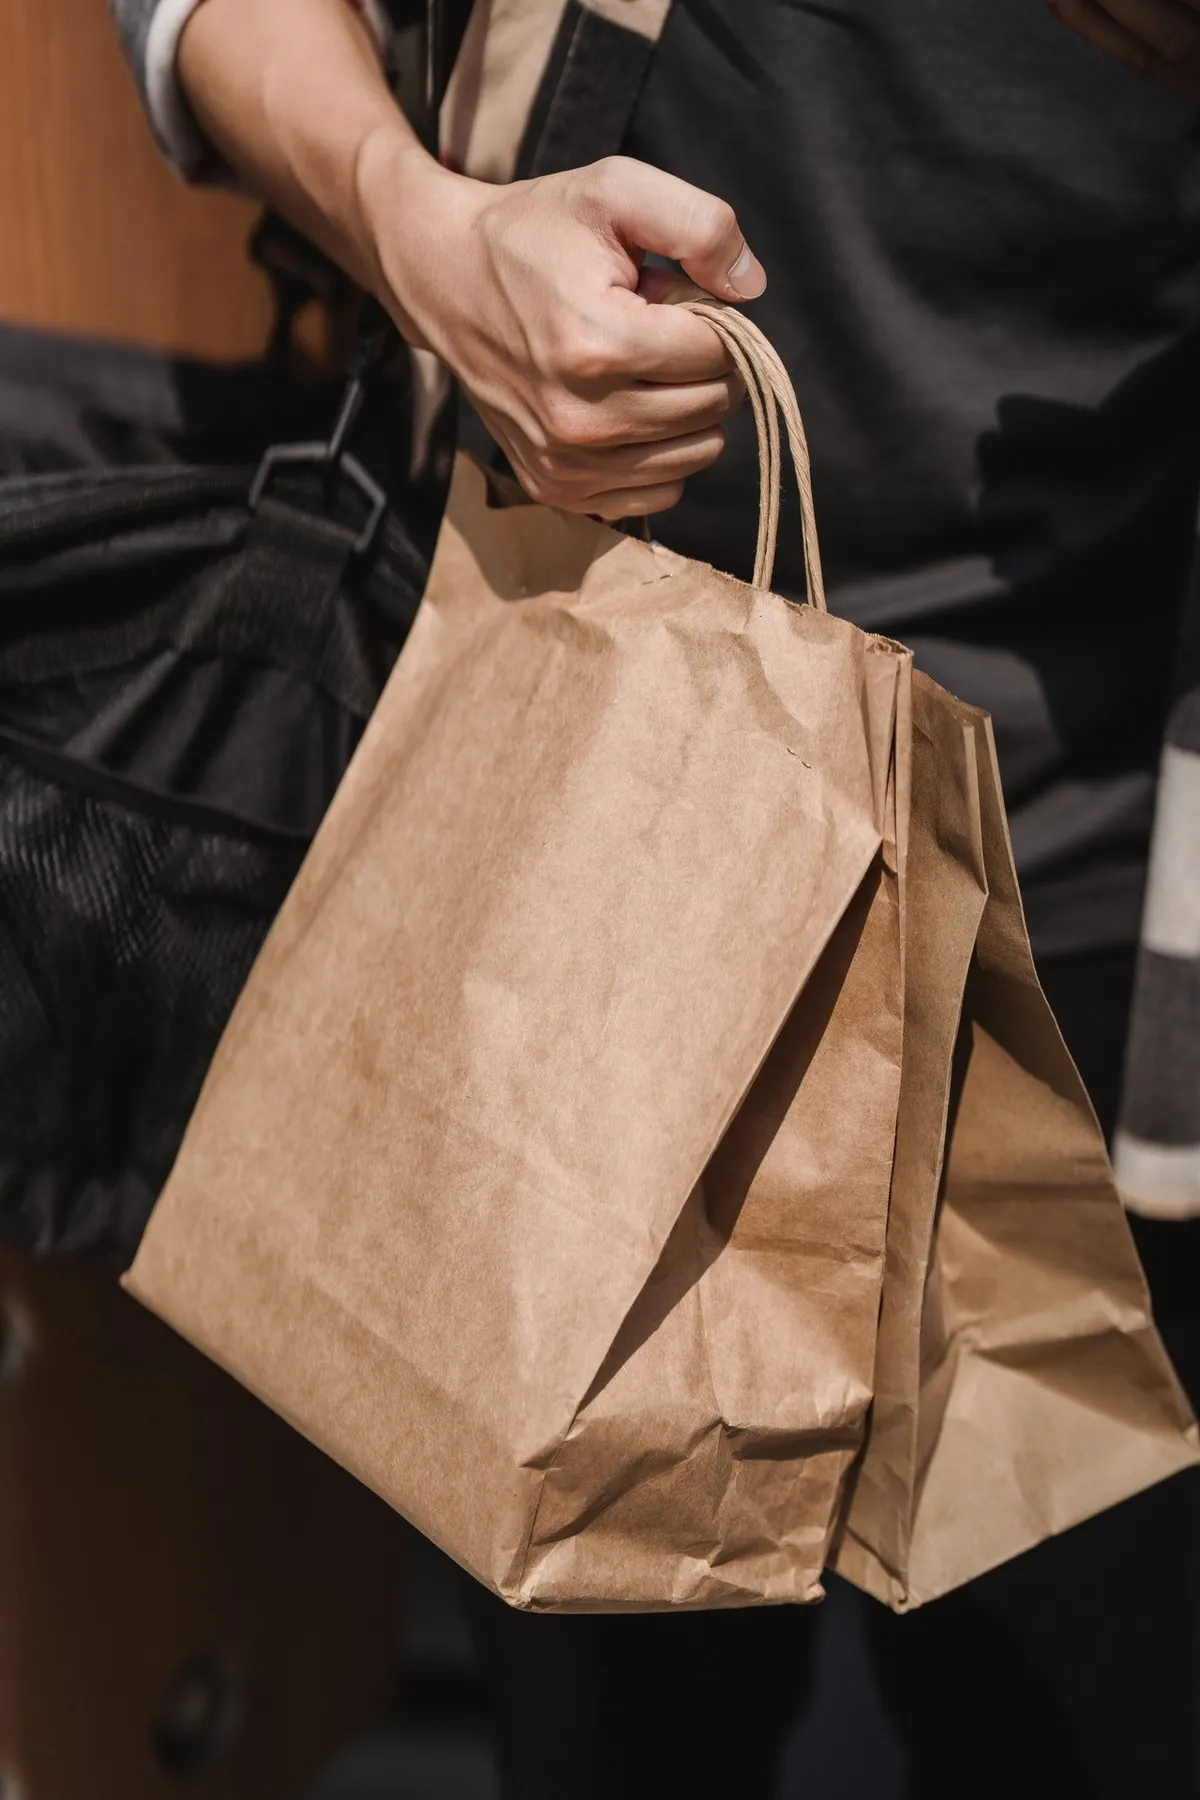 James did not want to take anything from the old lady who could not even afford a few groceries. | Source: Pexels